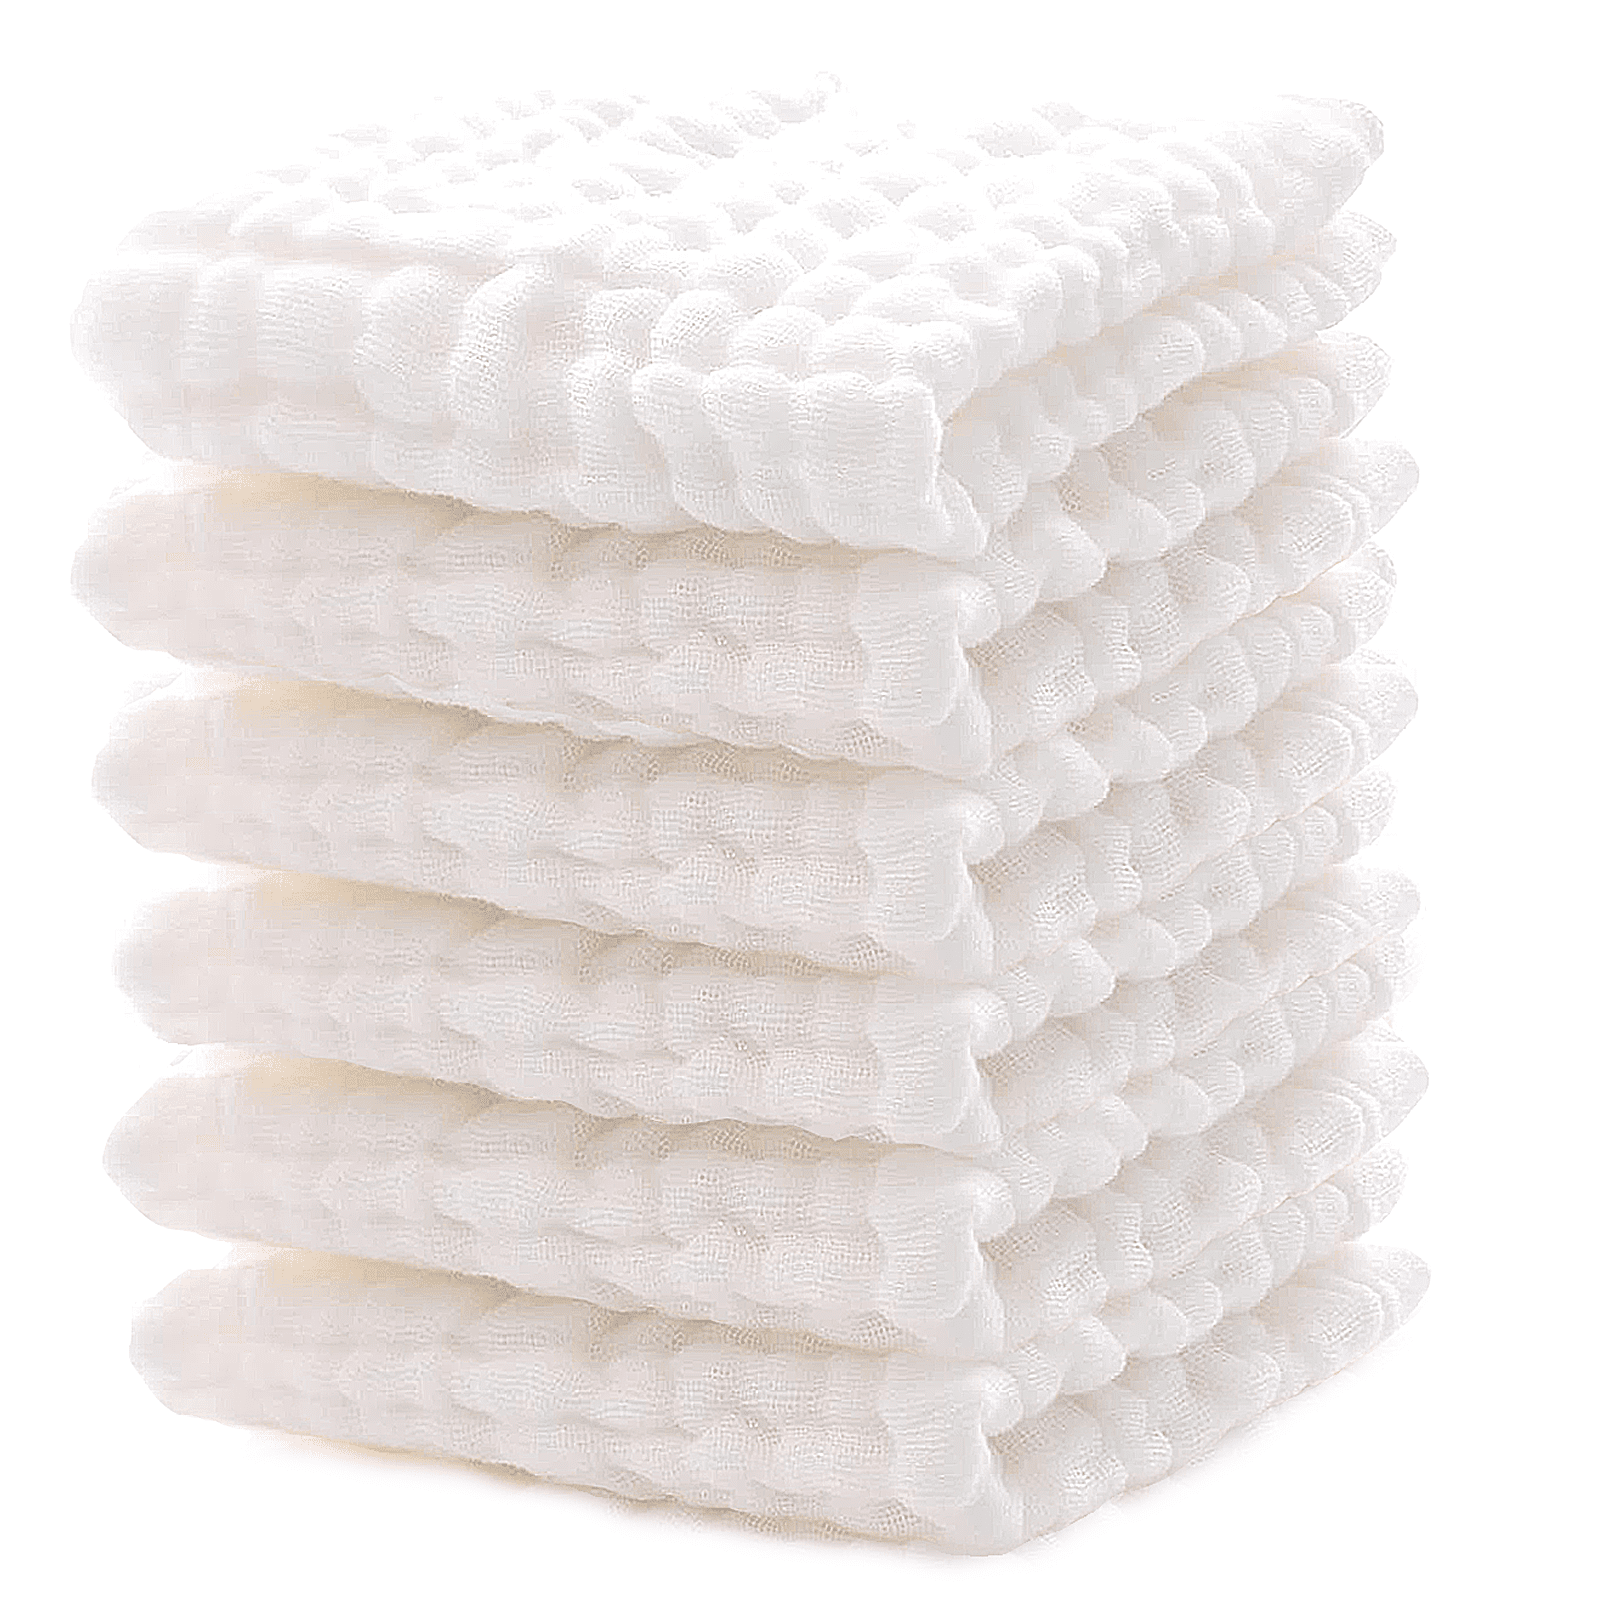 Baby Washcloths, Muslin Cotton Baby Towels, Large 10”x10” (White